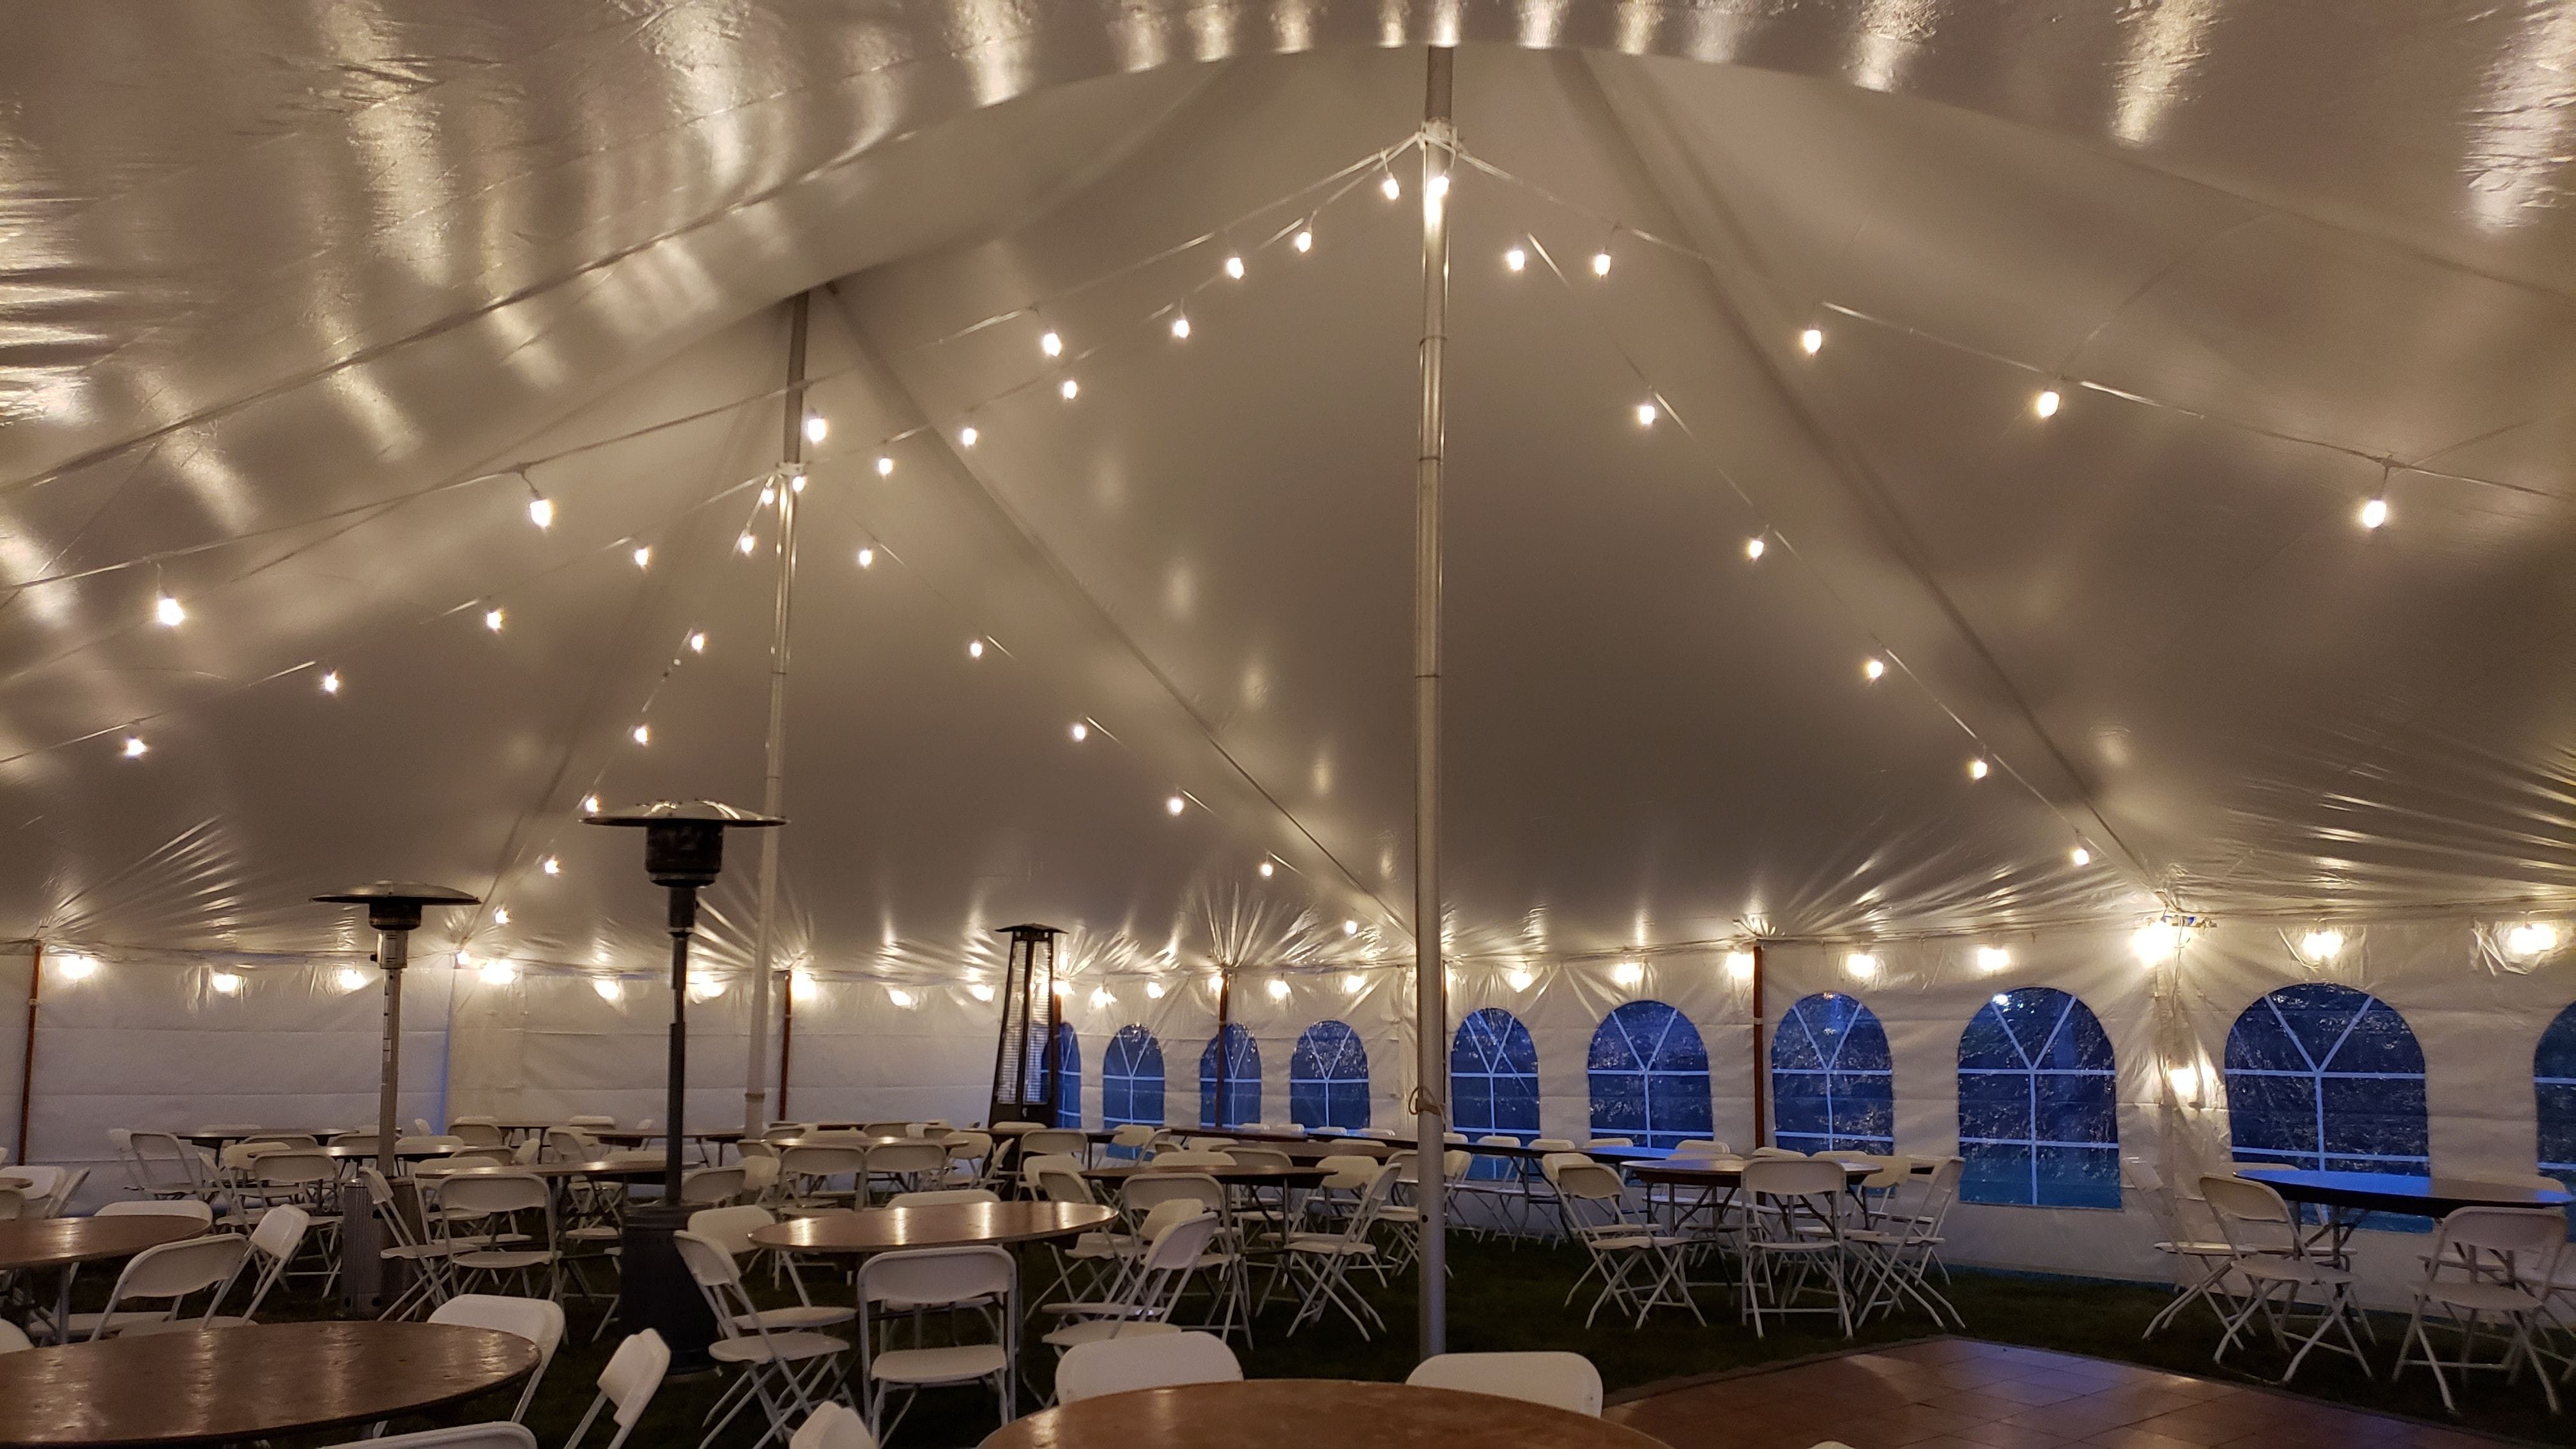 Tent wedding lighting. White cord bistro on dimmers inside a tent for a wedding.